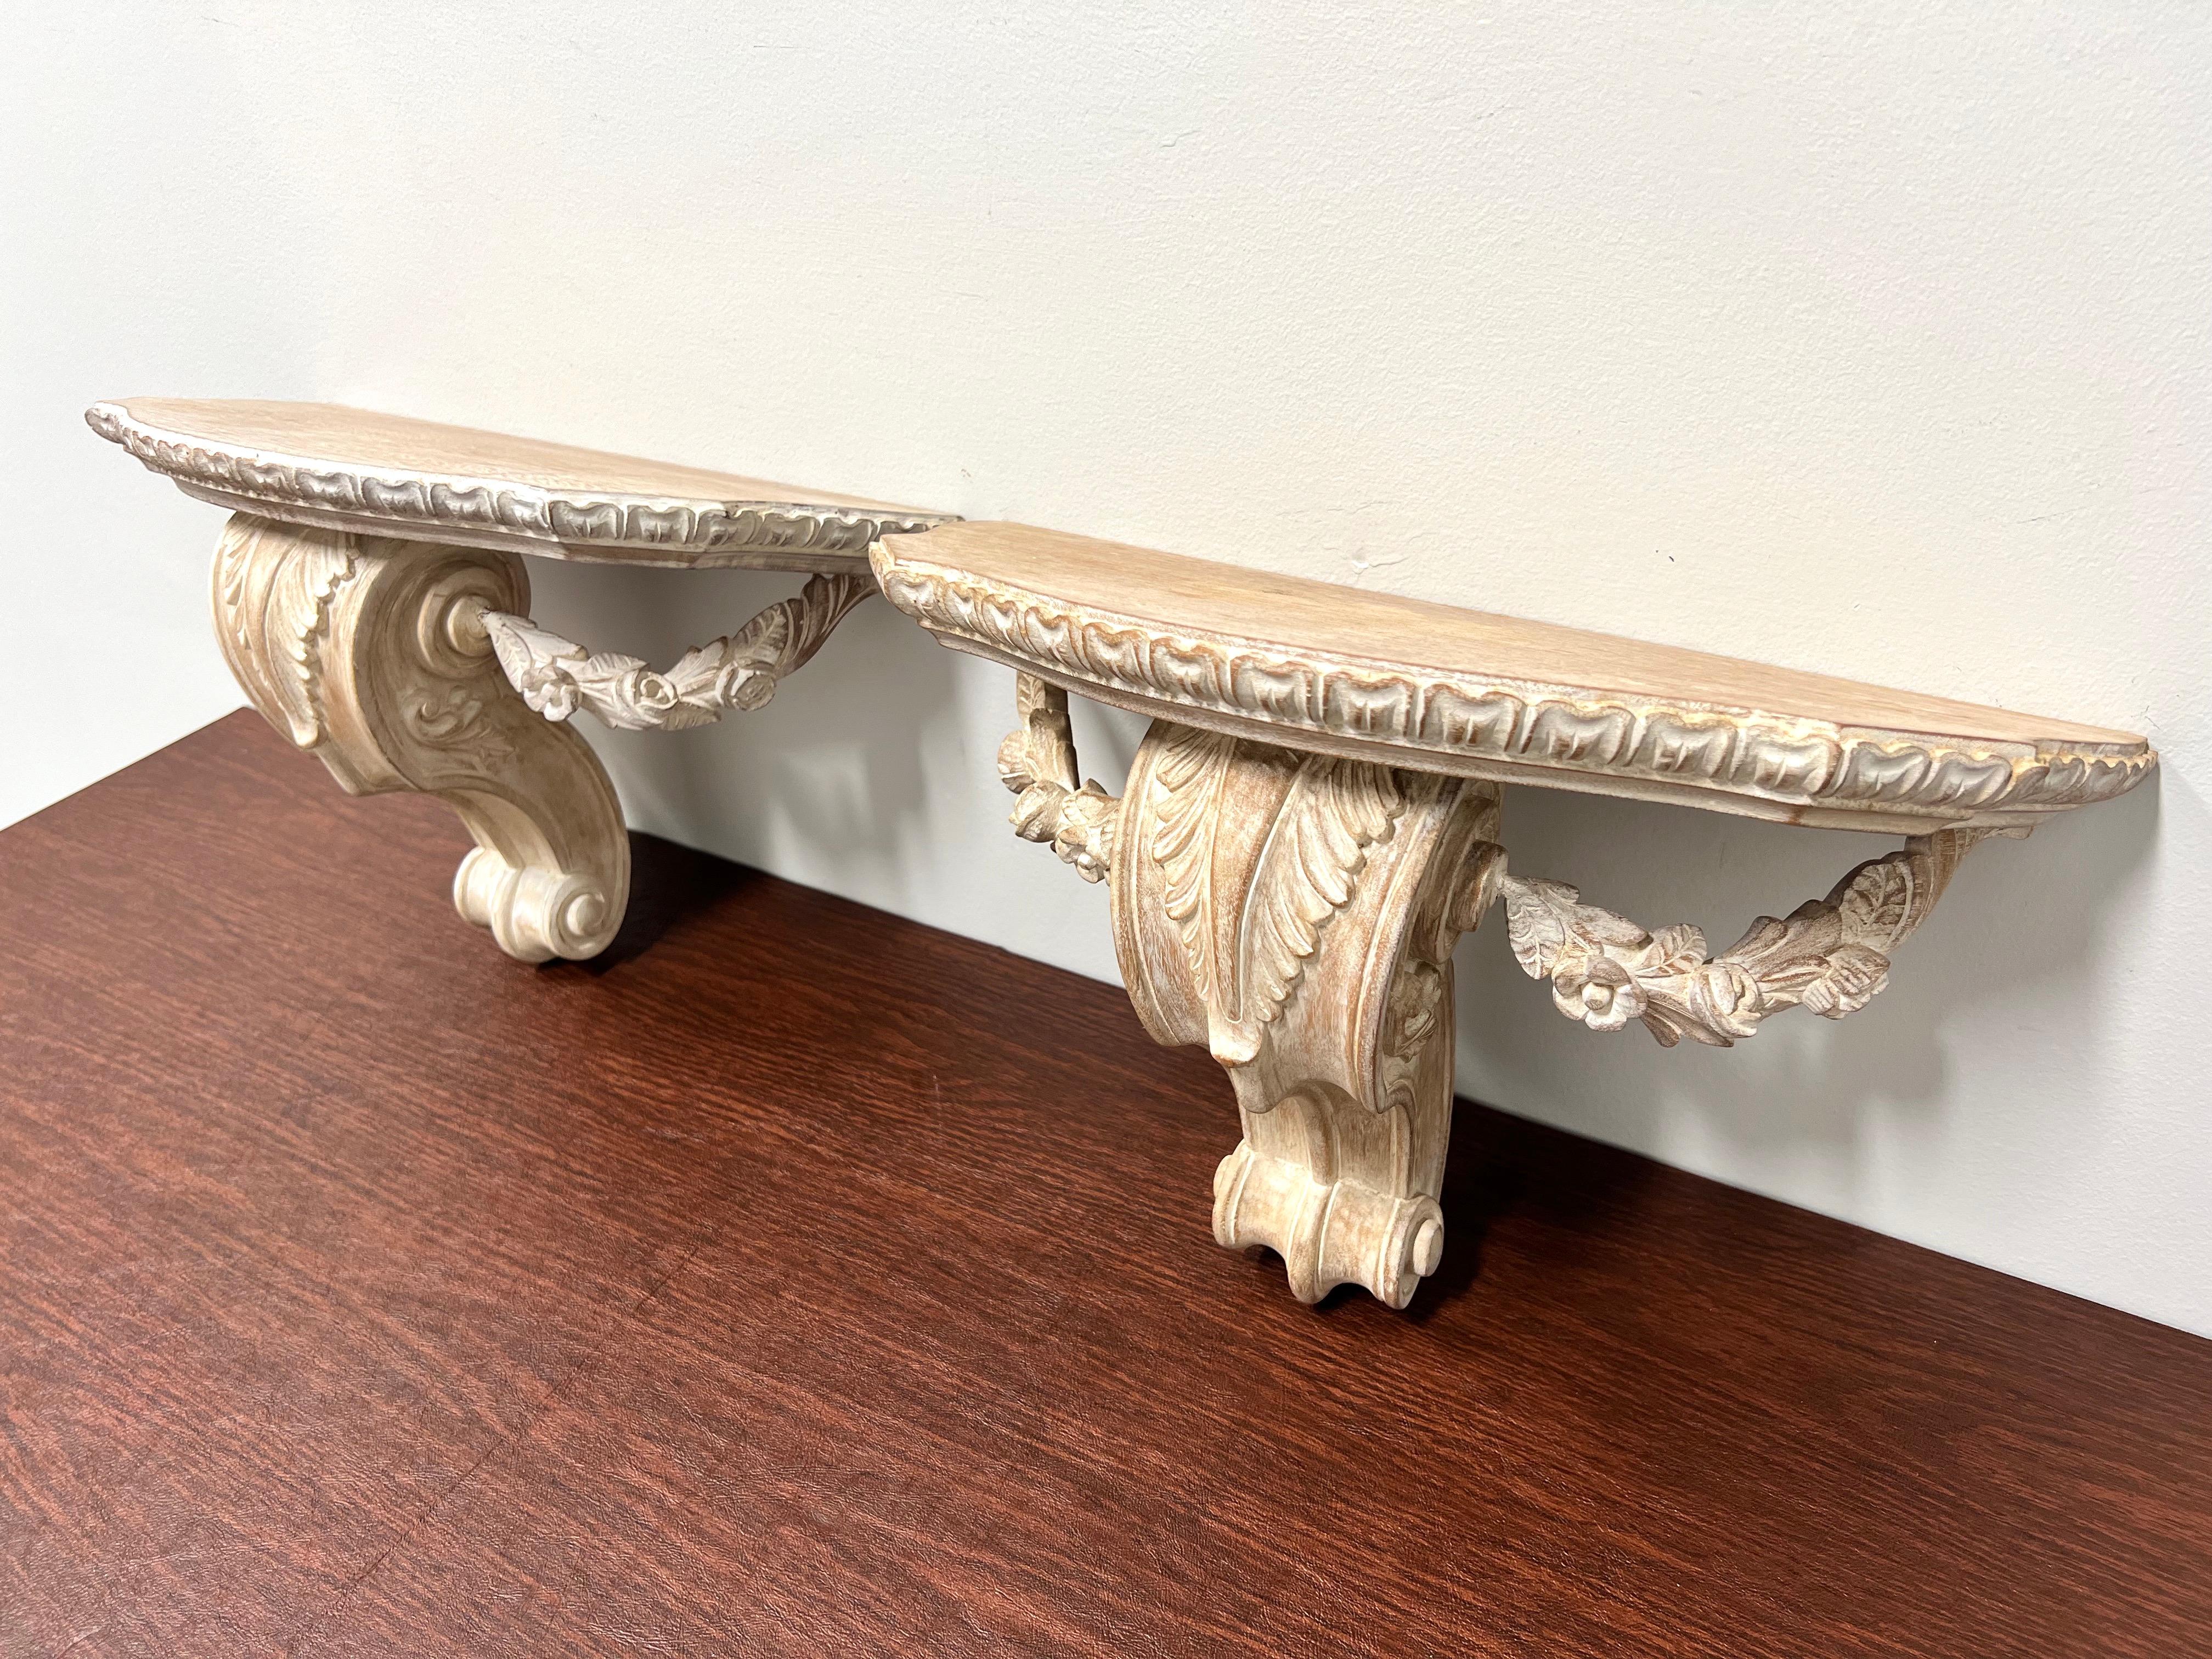 Rococo 1980's Carved Whitewashed Wood Wall Bracket Shelves - Pair For Sale